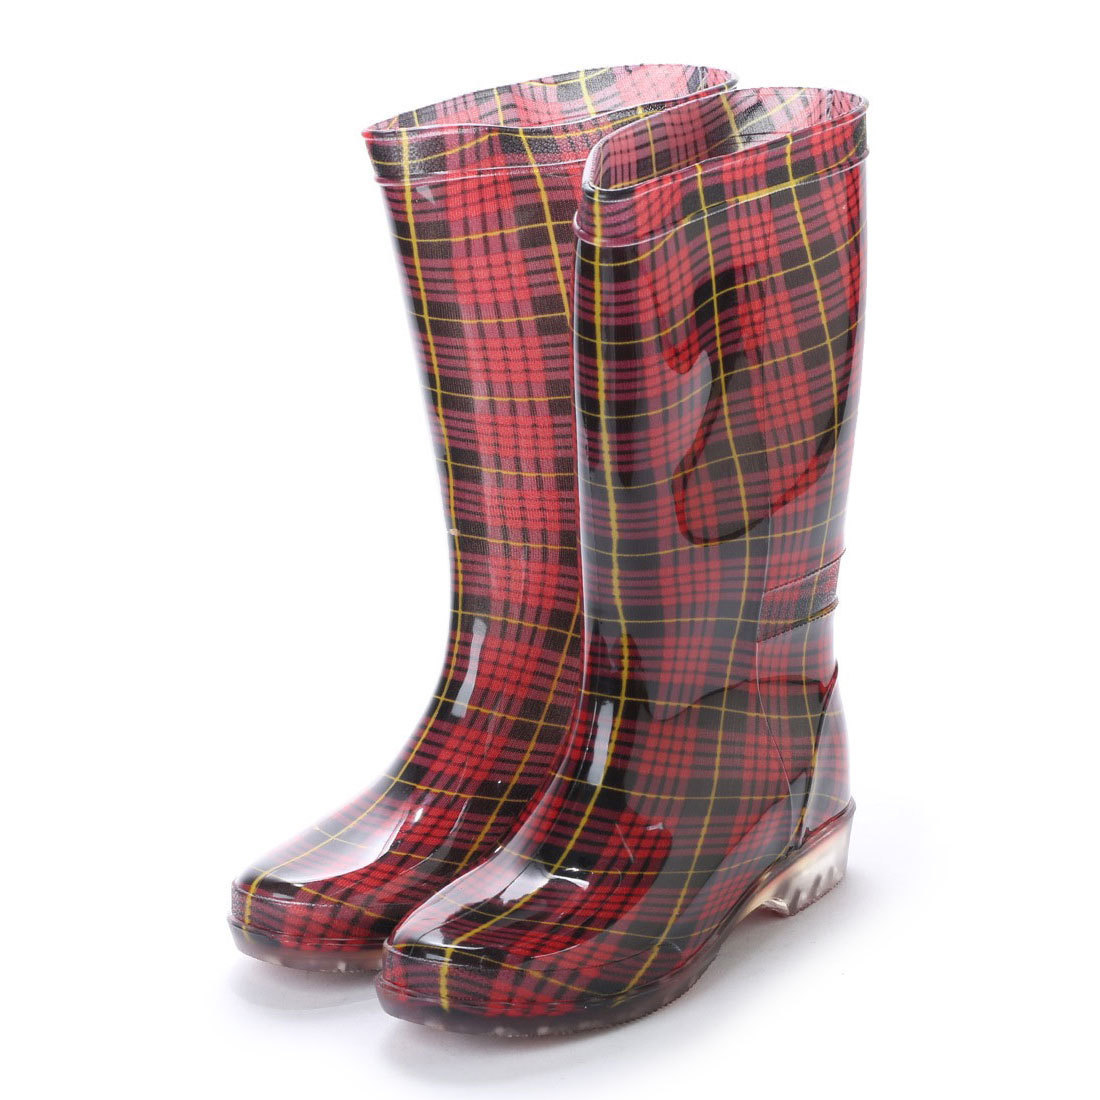 15032 outlet lady's rain boots L/23.5cm-24.0cm RED/CHK( red check ) rain long boots boots long height 15032